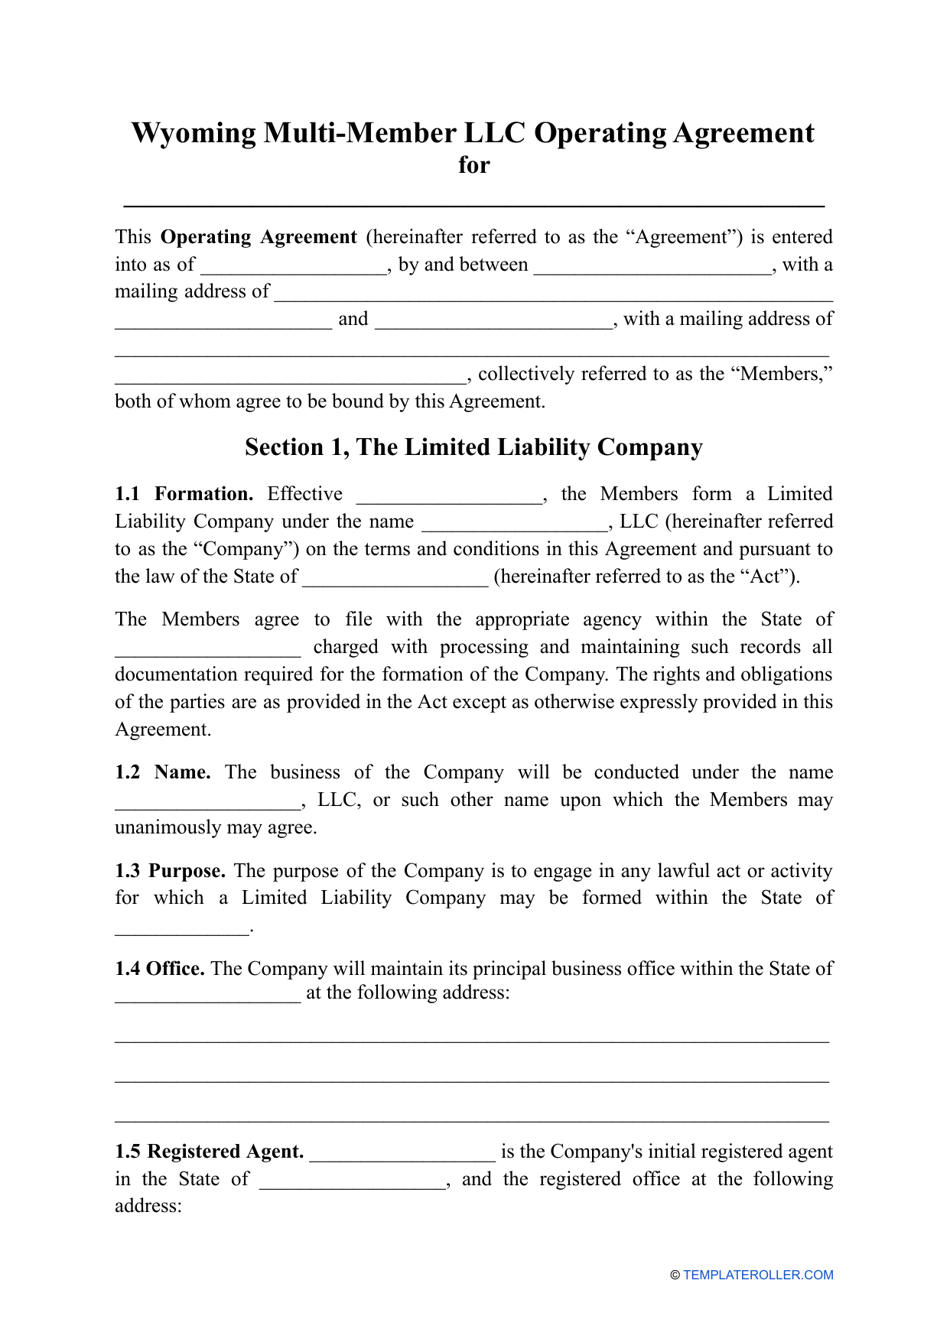 Multi-Member LLC Operating Agreement Template - Wyoming, Page 1